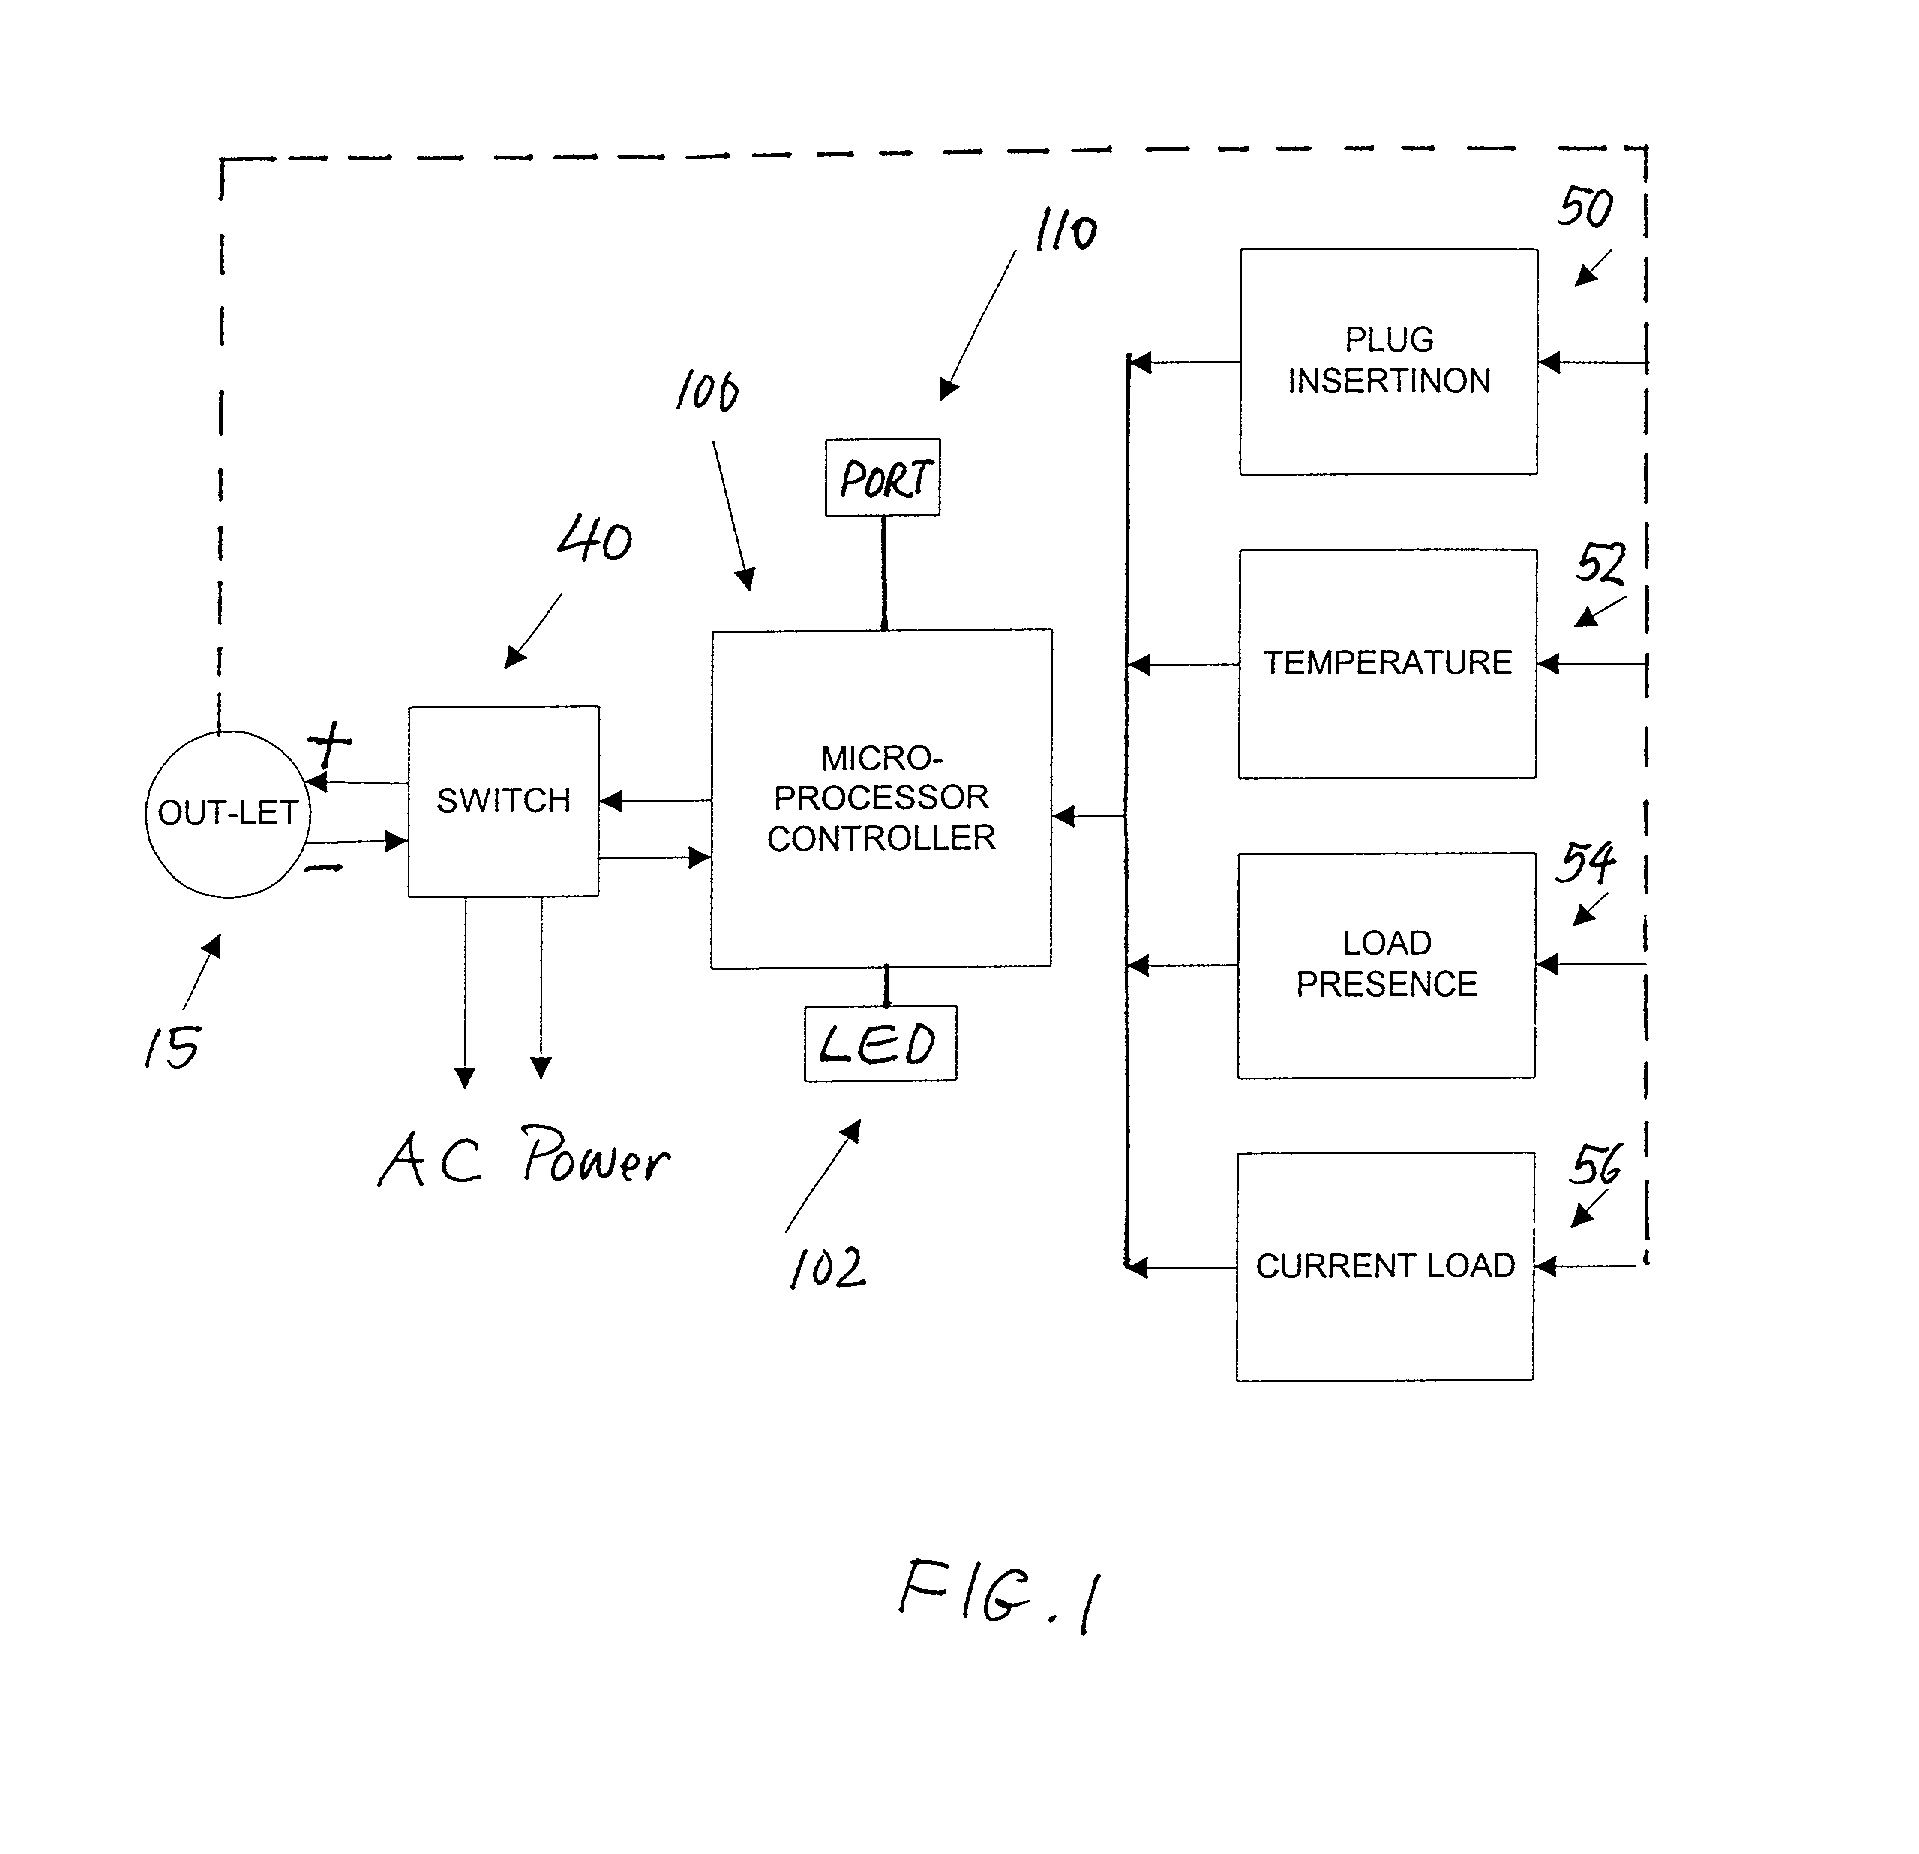 Safety electrical outlet with logic control circuit